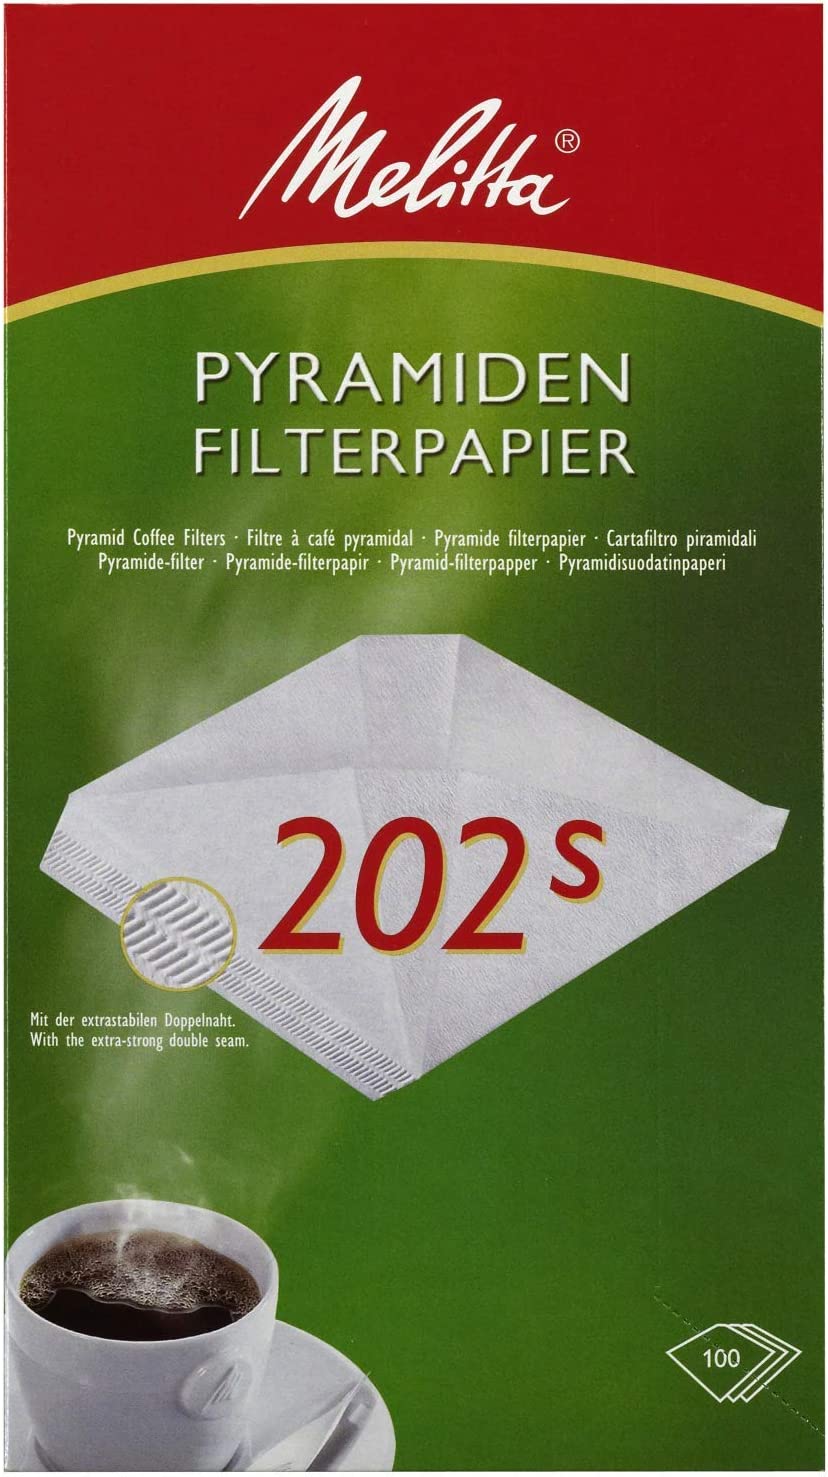 Melitta Pyramid Filter Bags 202s for Catering Machines